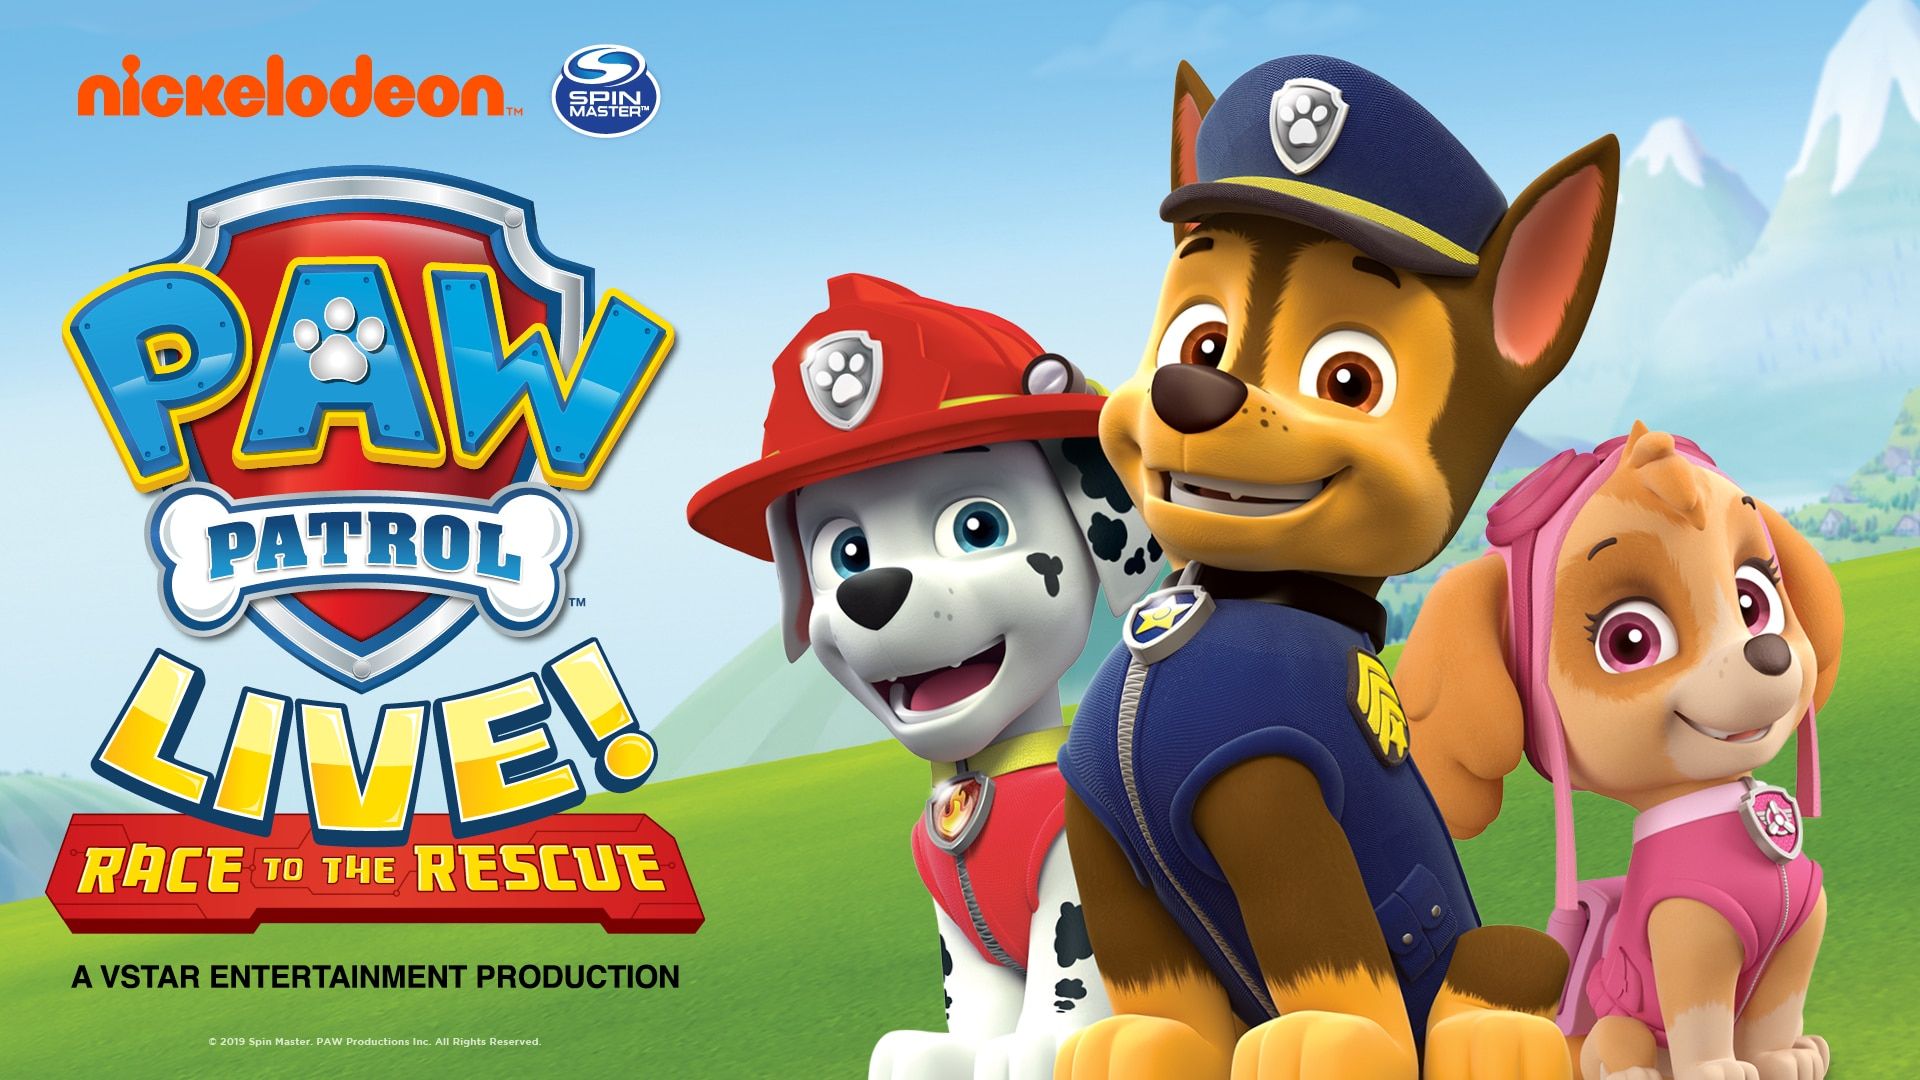 Paw Patrol Live! Race to the Rescue Morning